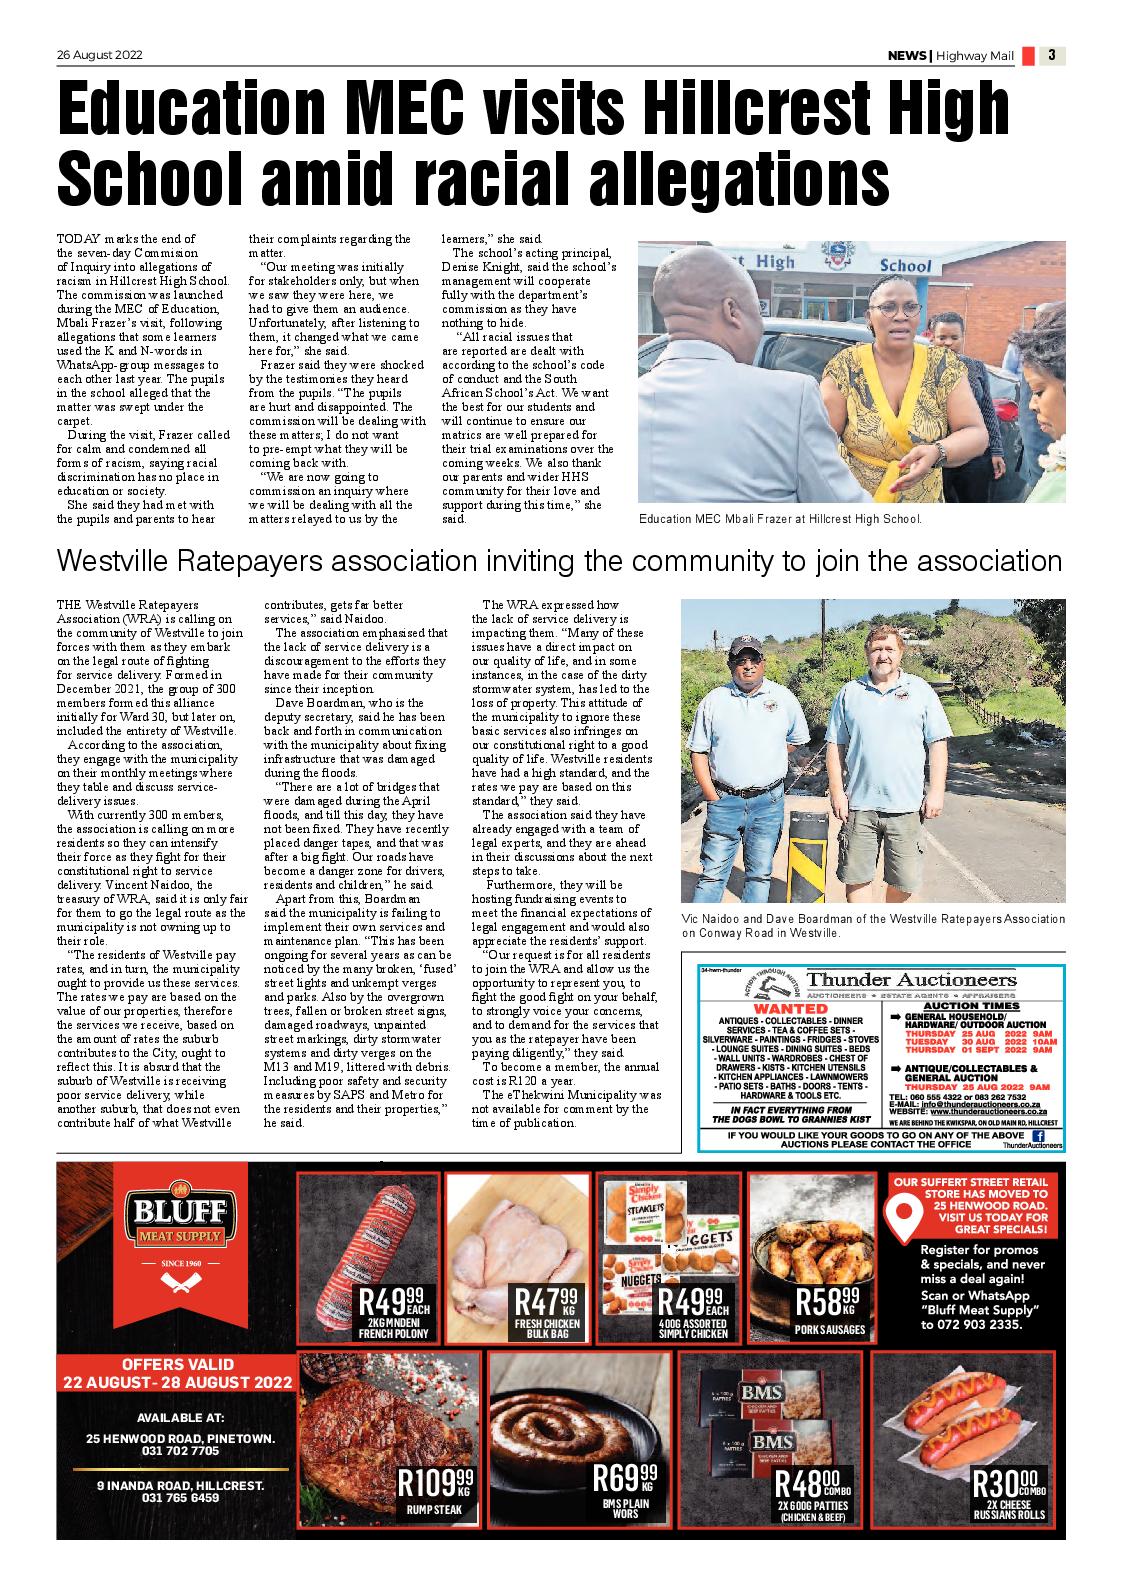 Highway Mail 26 August 2022 page 3